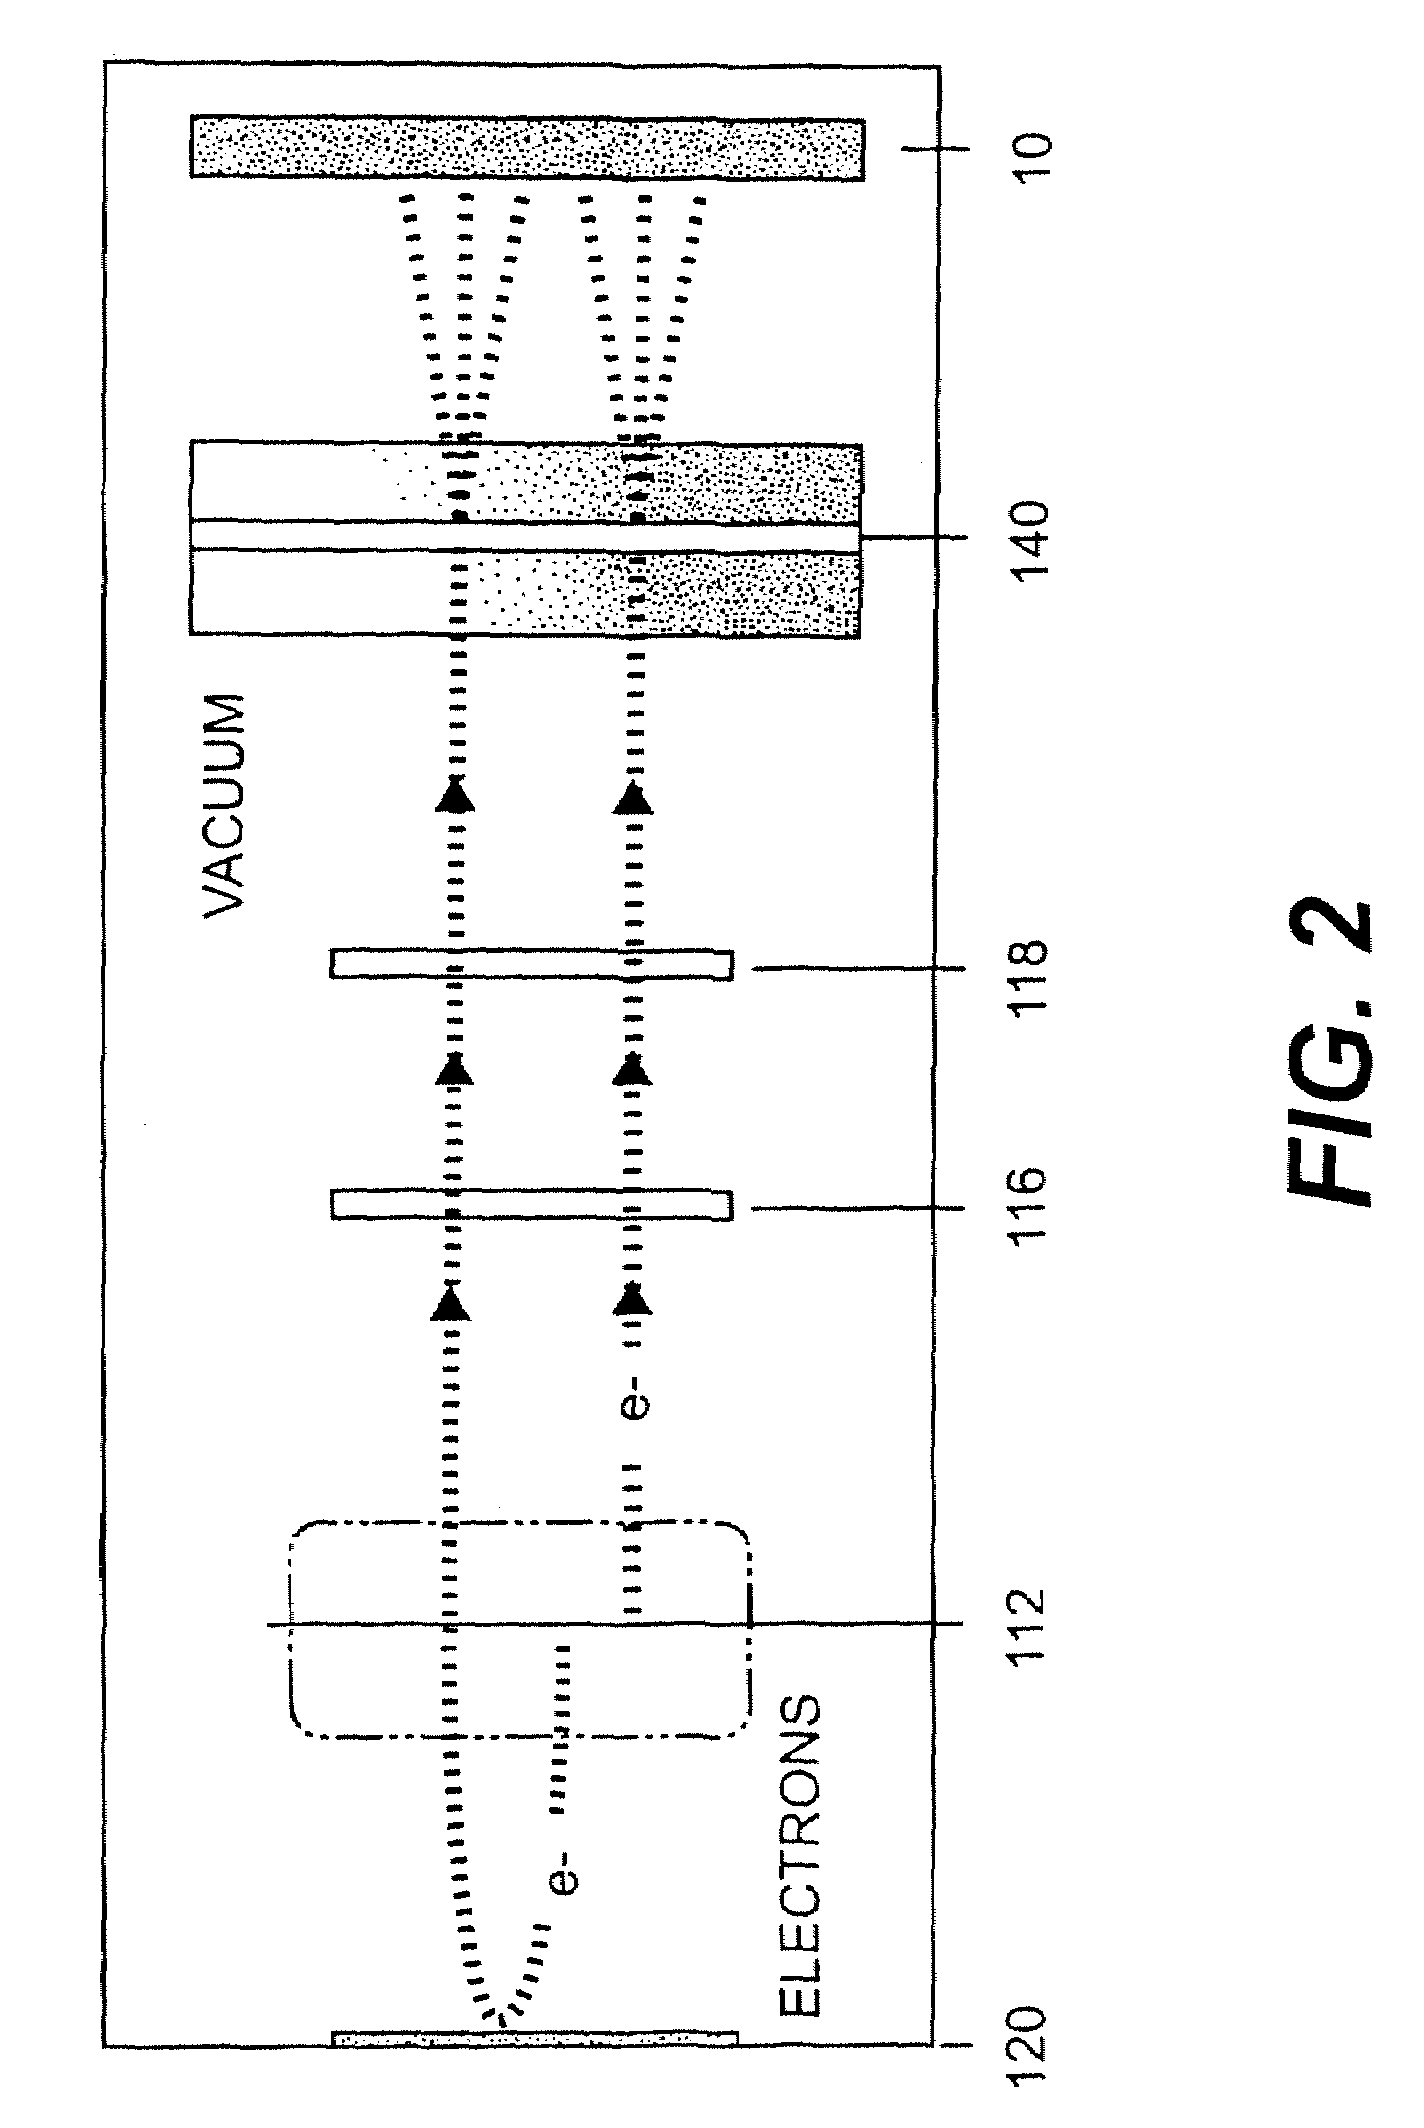 Particle beam processing apparatus and materials treatable using the apparatus